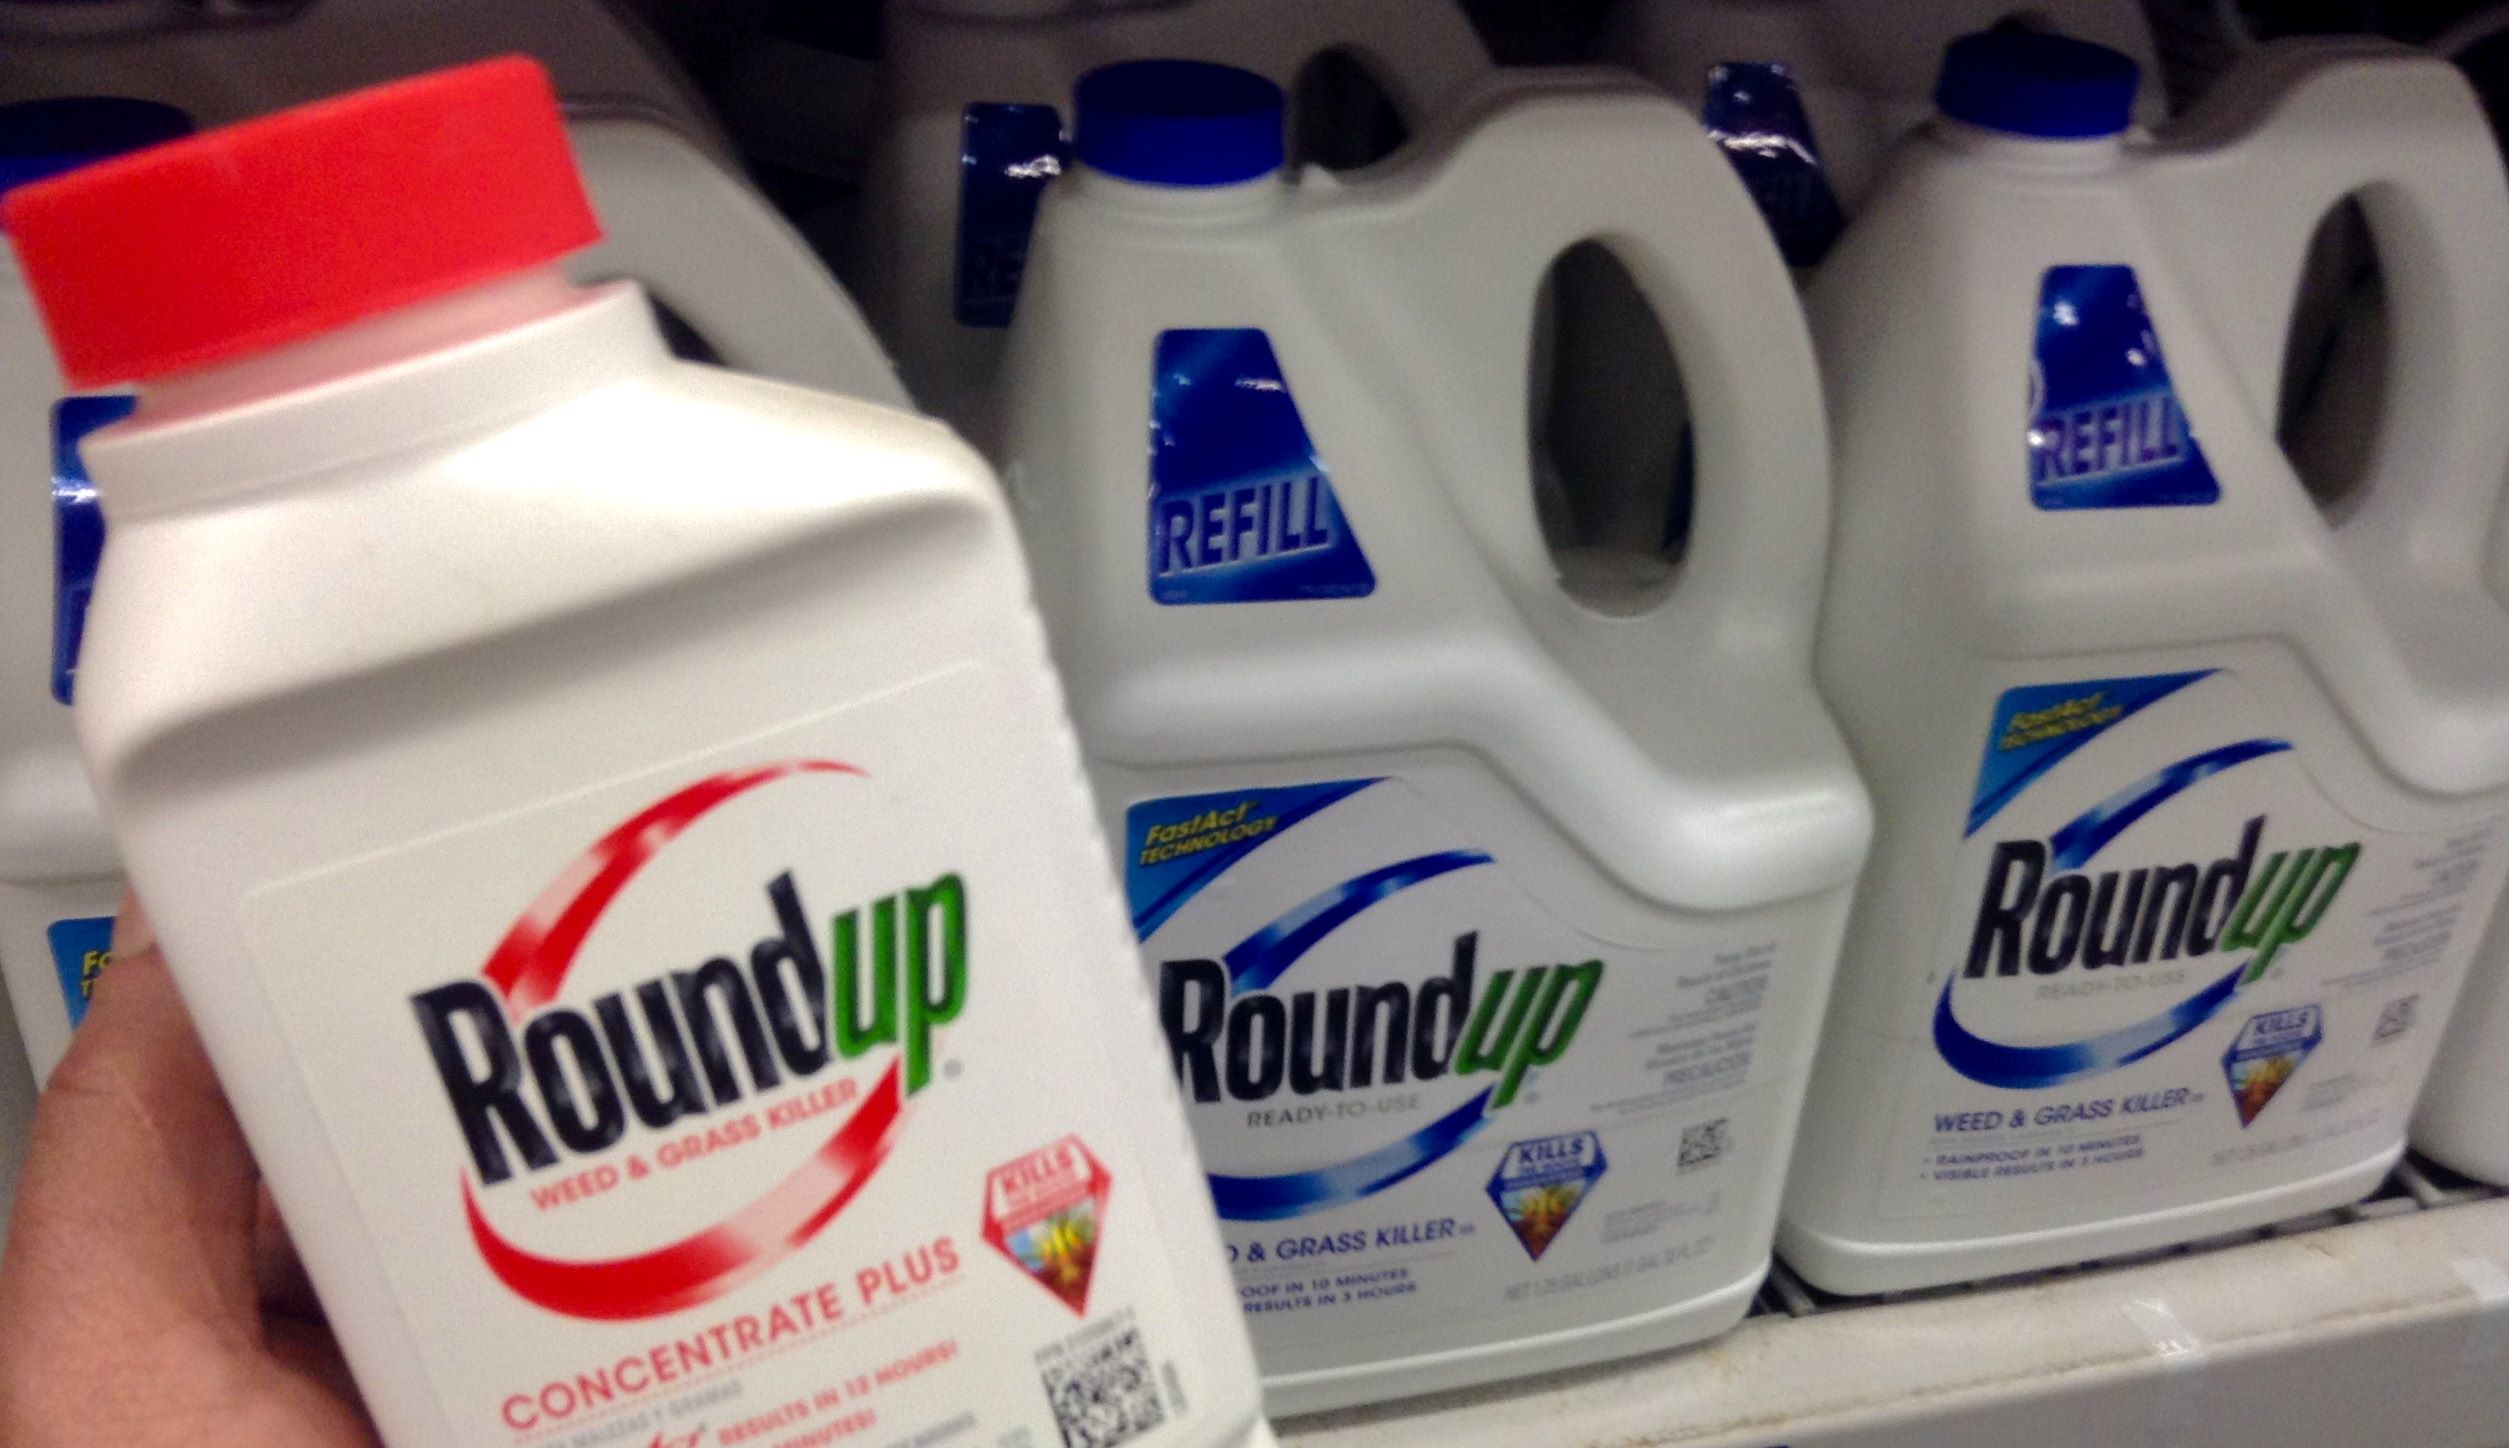 New York State Bans Glyphosate/Roundup on State Land, While Advocates Push  for Organic Land Management - Beyond Pesticides Daily News Blog